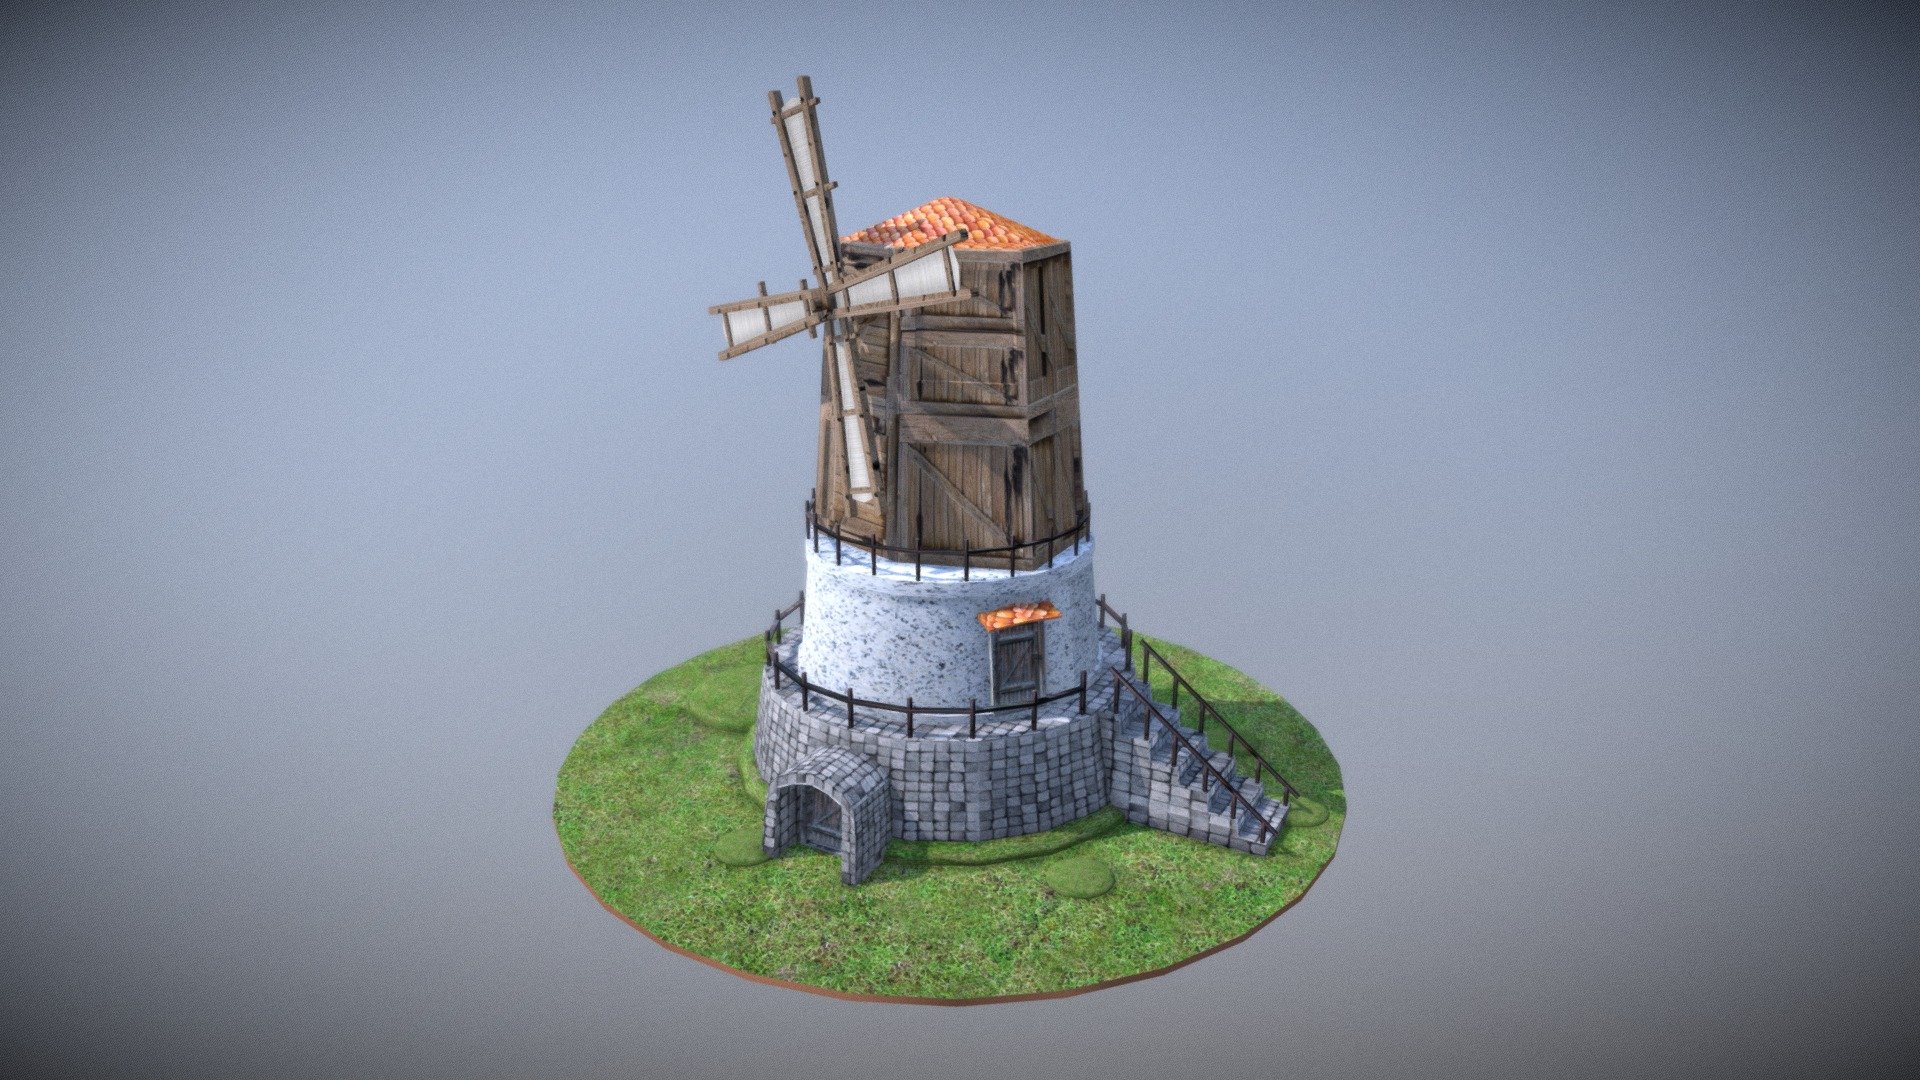 This is a quick and simple exercise about the use of simple textures to make buildings in Low Poly 3d model